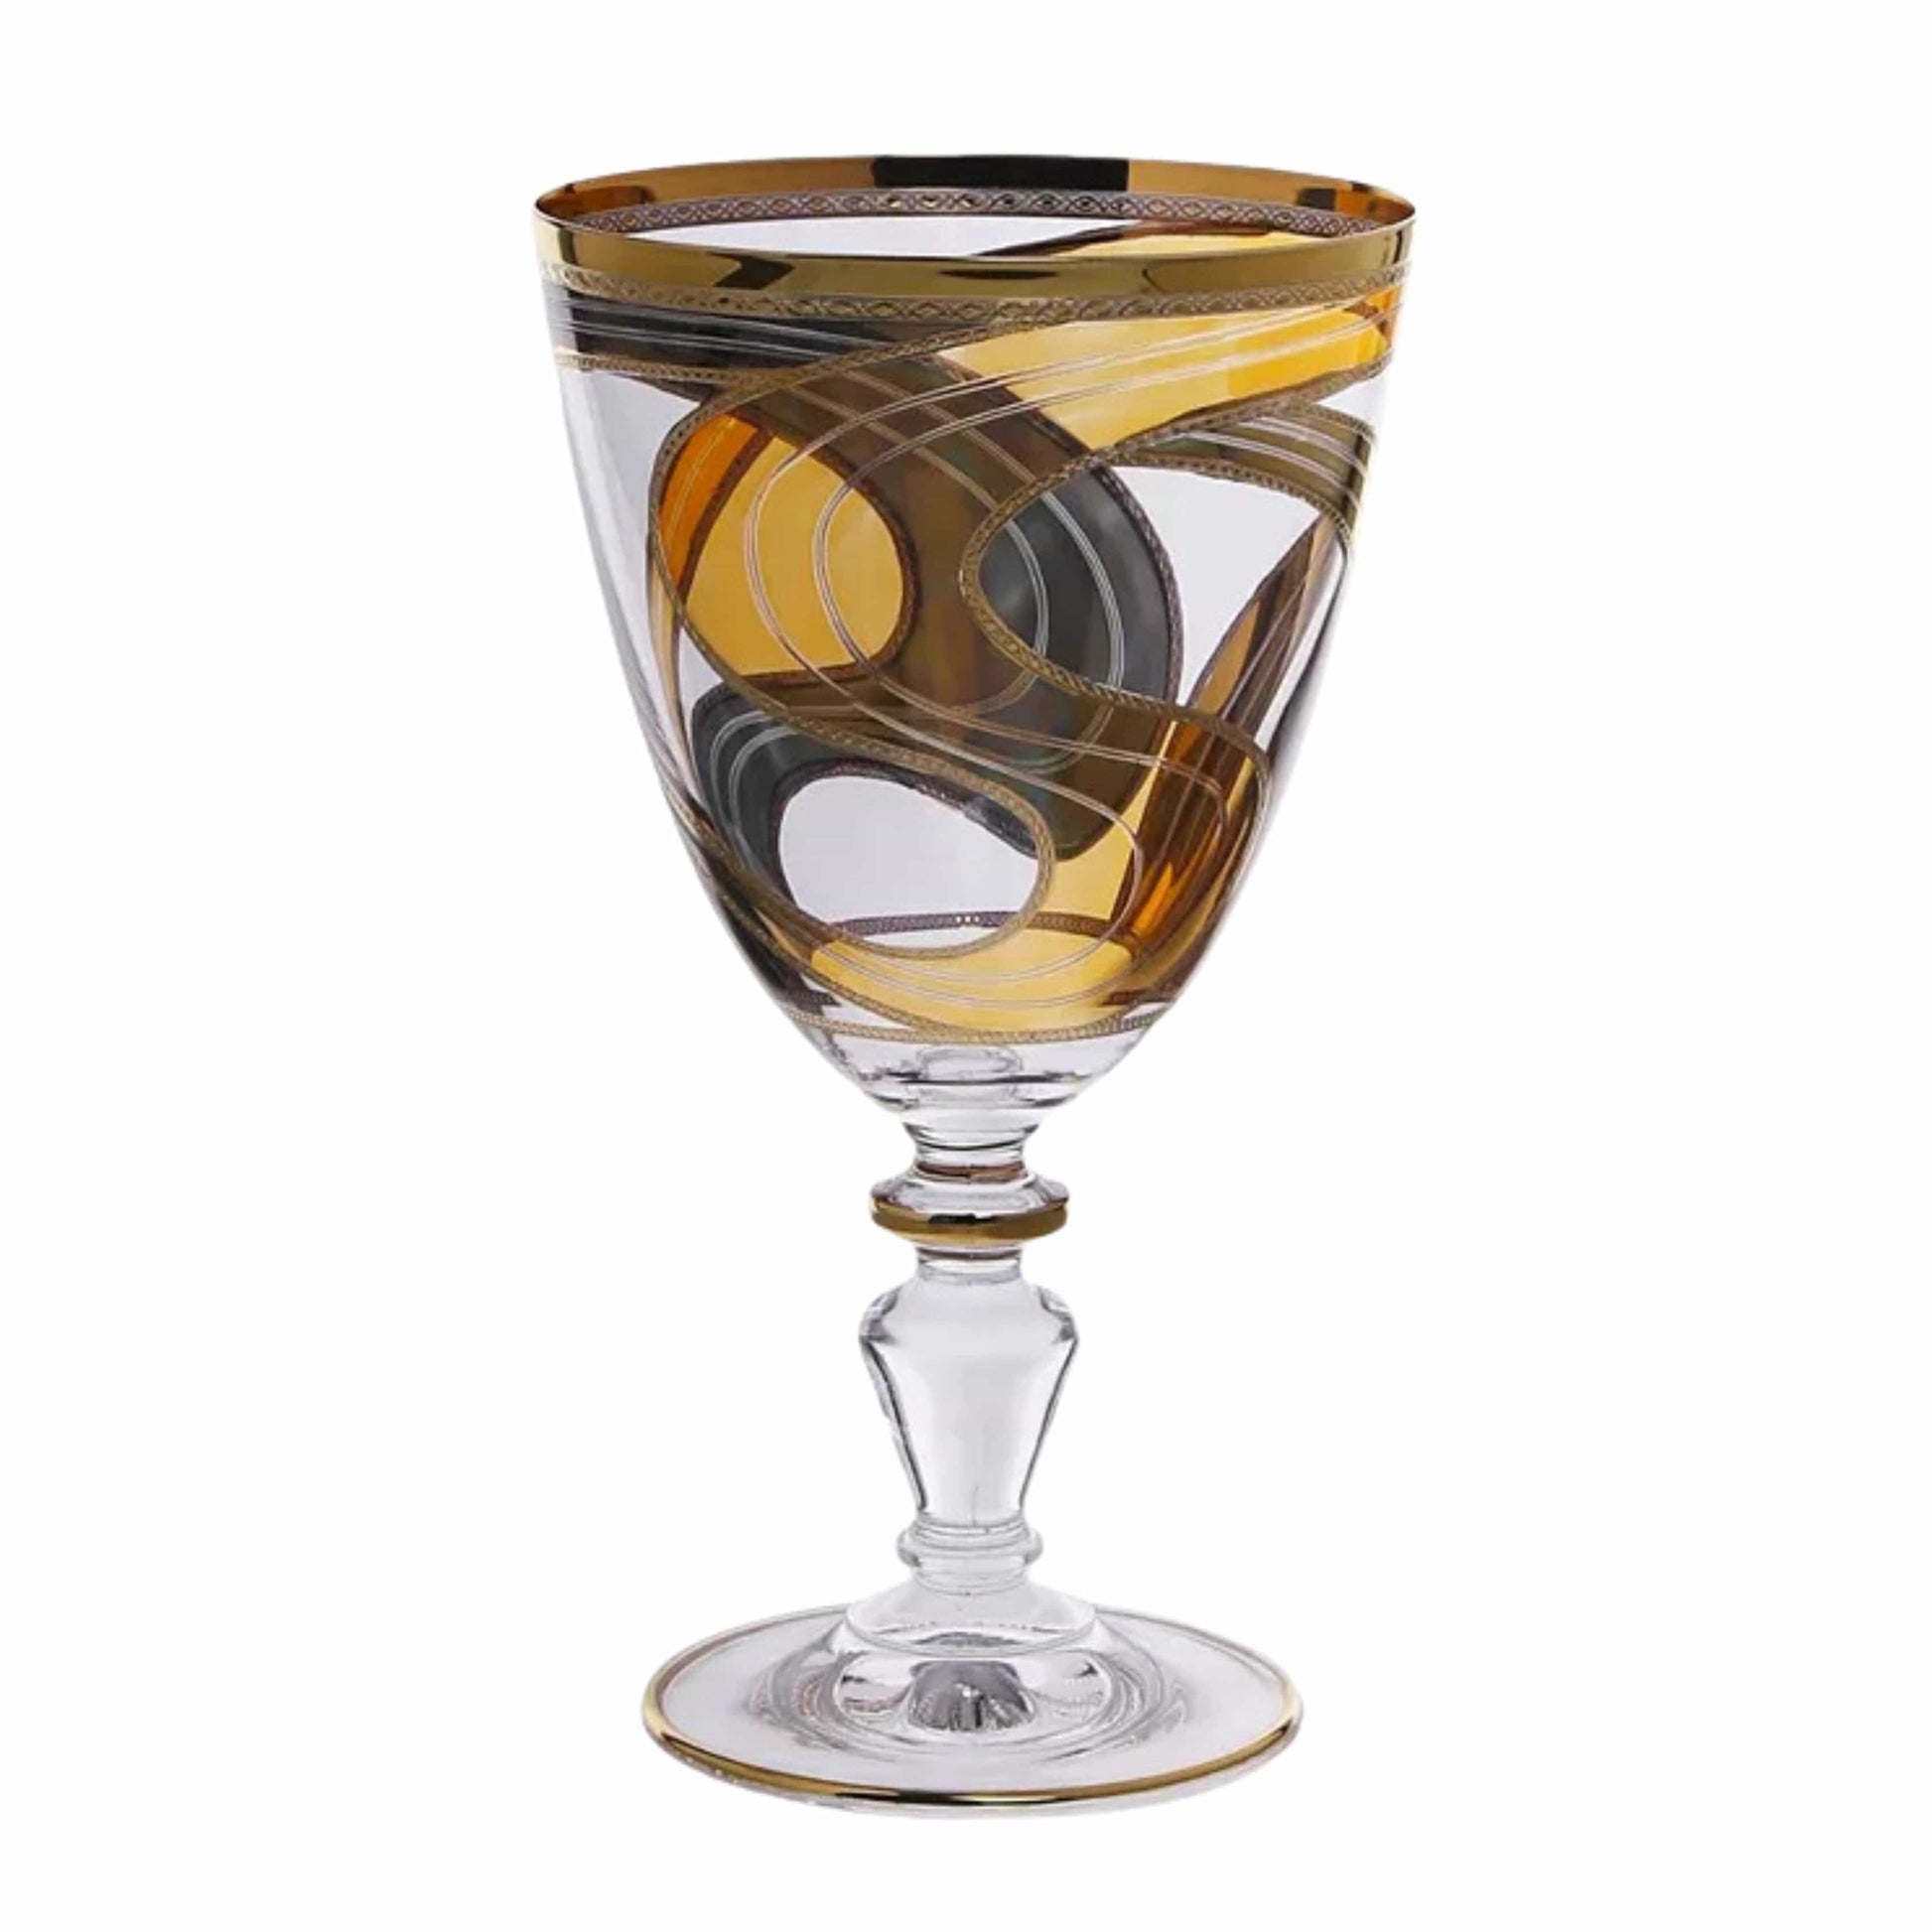 CLASSIC TOUCH Kitchenware CLASSIC TOUCH - Set of 4 Water Glasses with 24K Gold Swivel Design